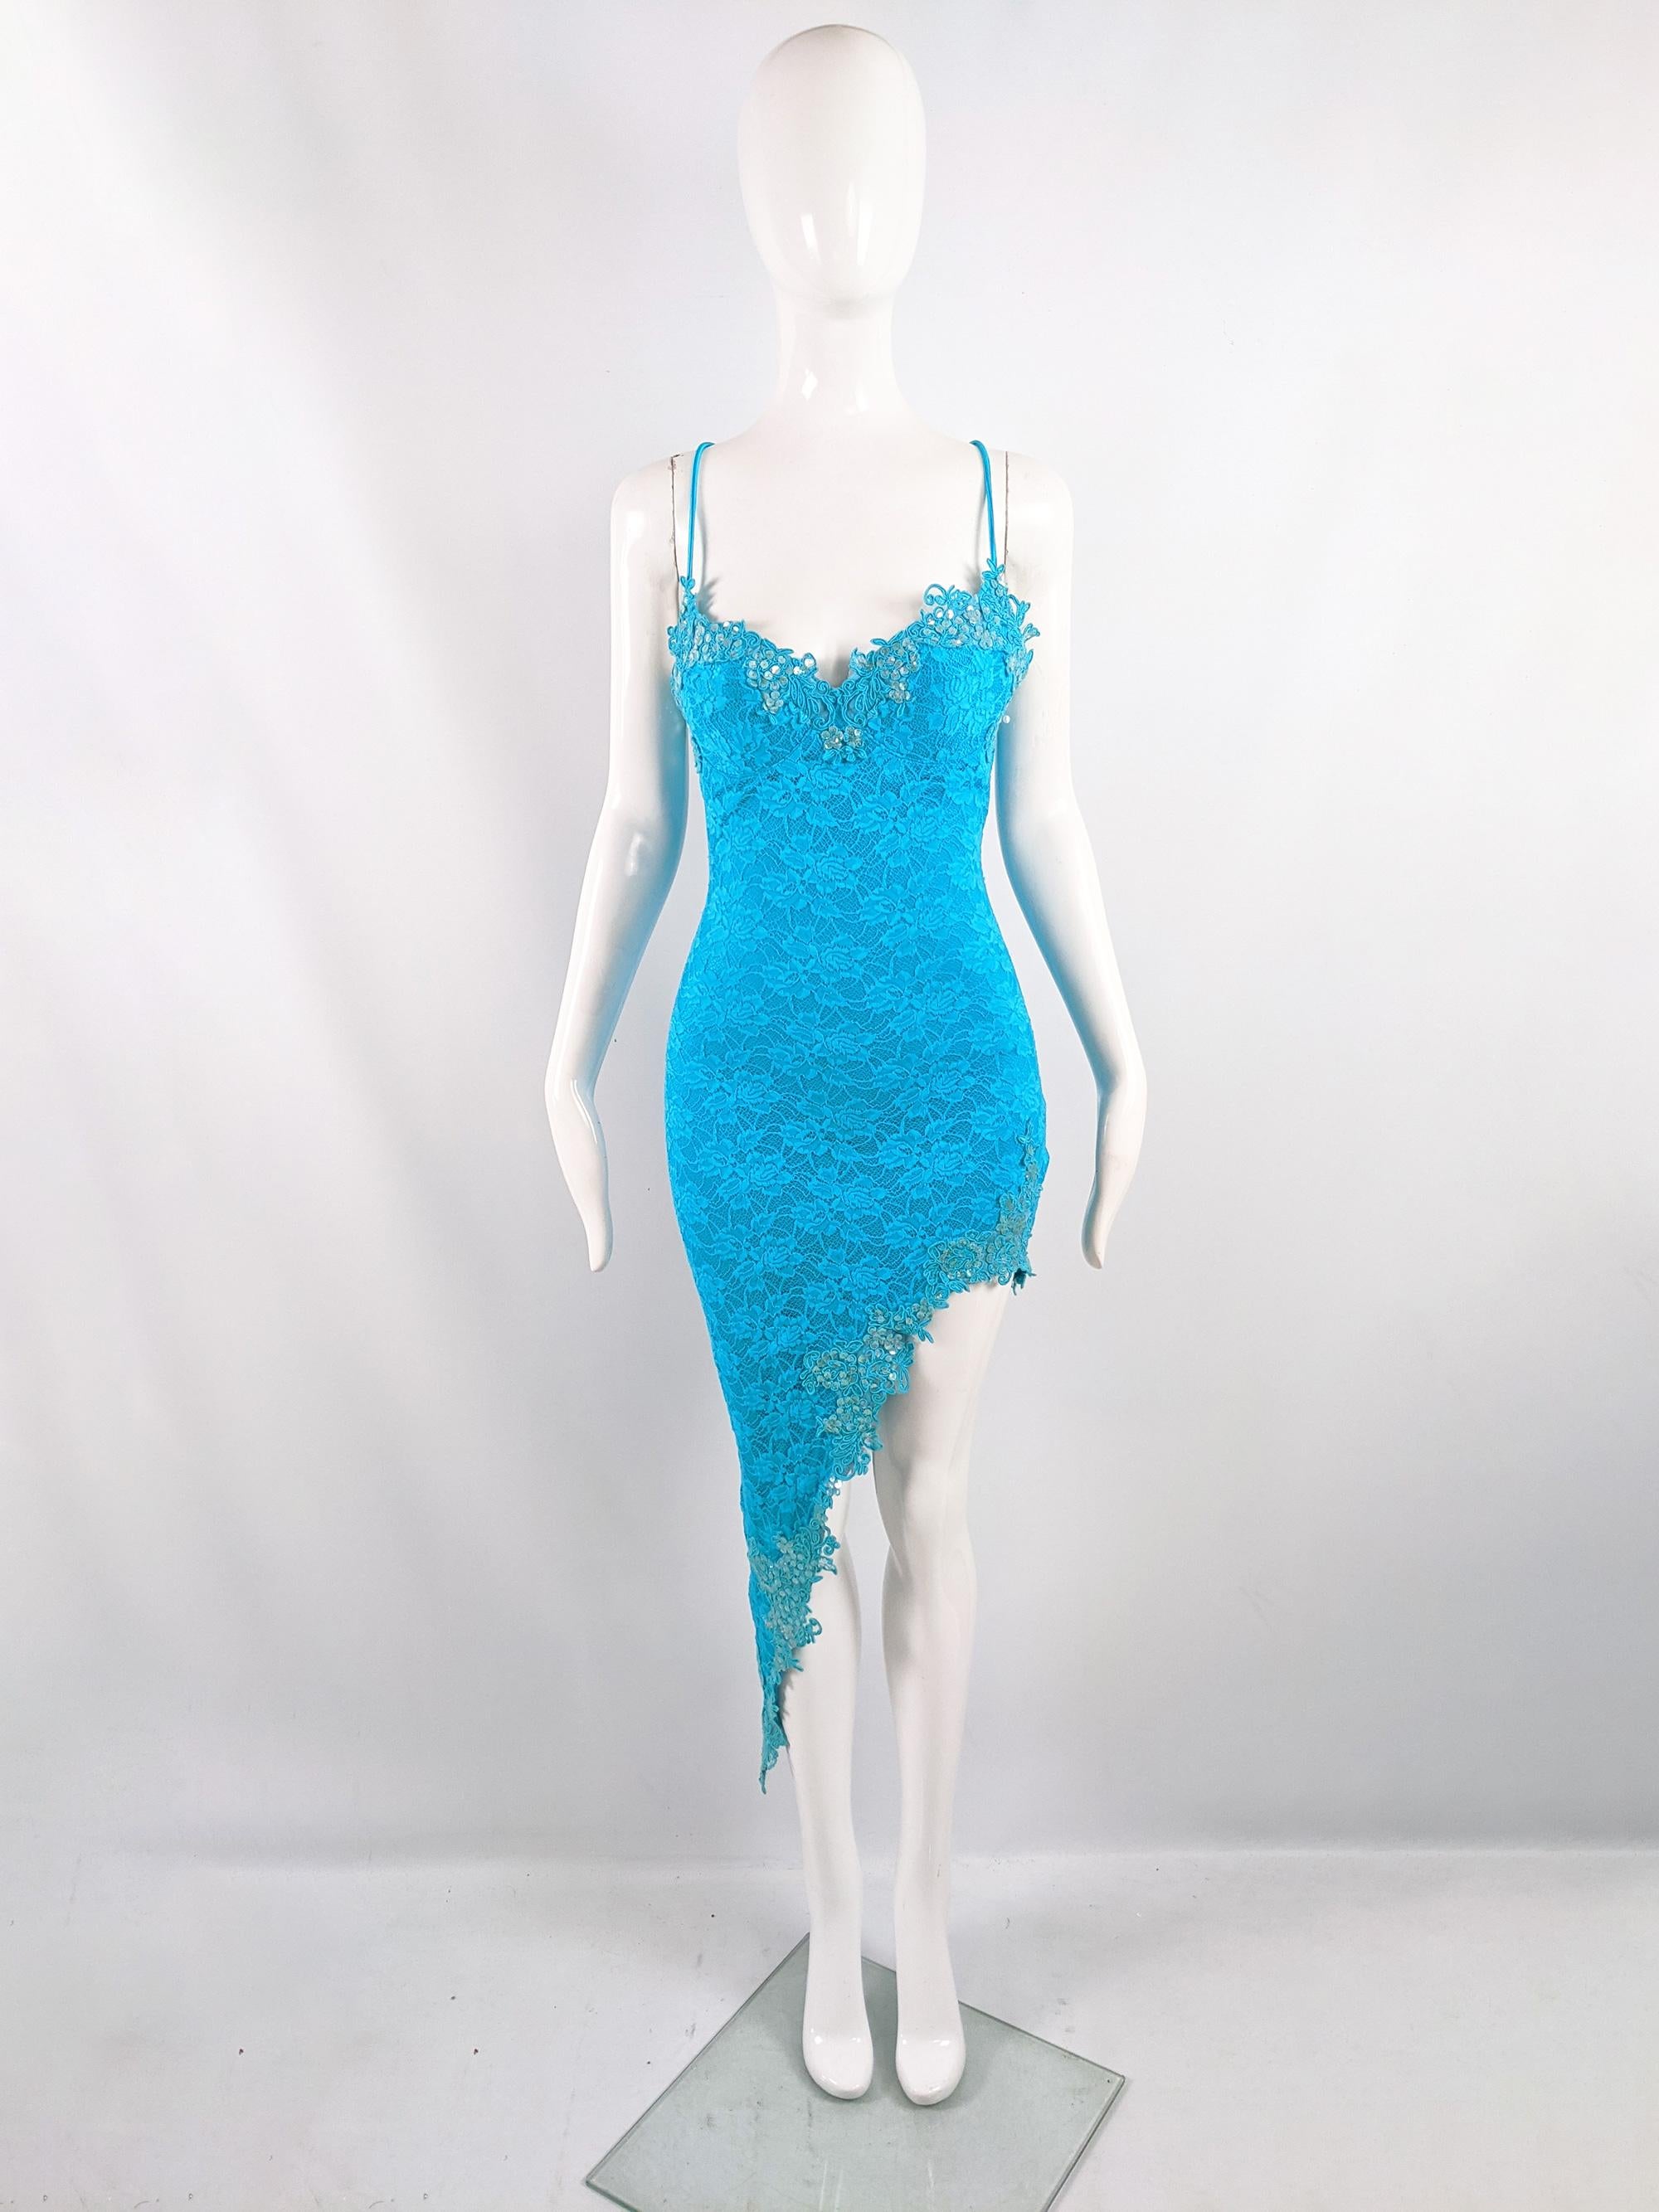 An incredibly sexy vintage womens evening dress by luxury British label, Catwalk Collection (known for their incredible corsetry and provocative eveningwear) from the early 2000s. In a turquoise blue lace with sequin embellishments, an asymmetrical